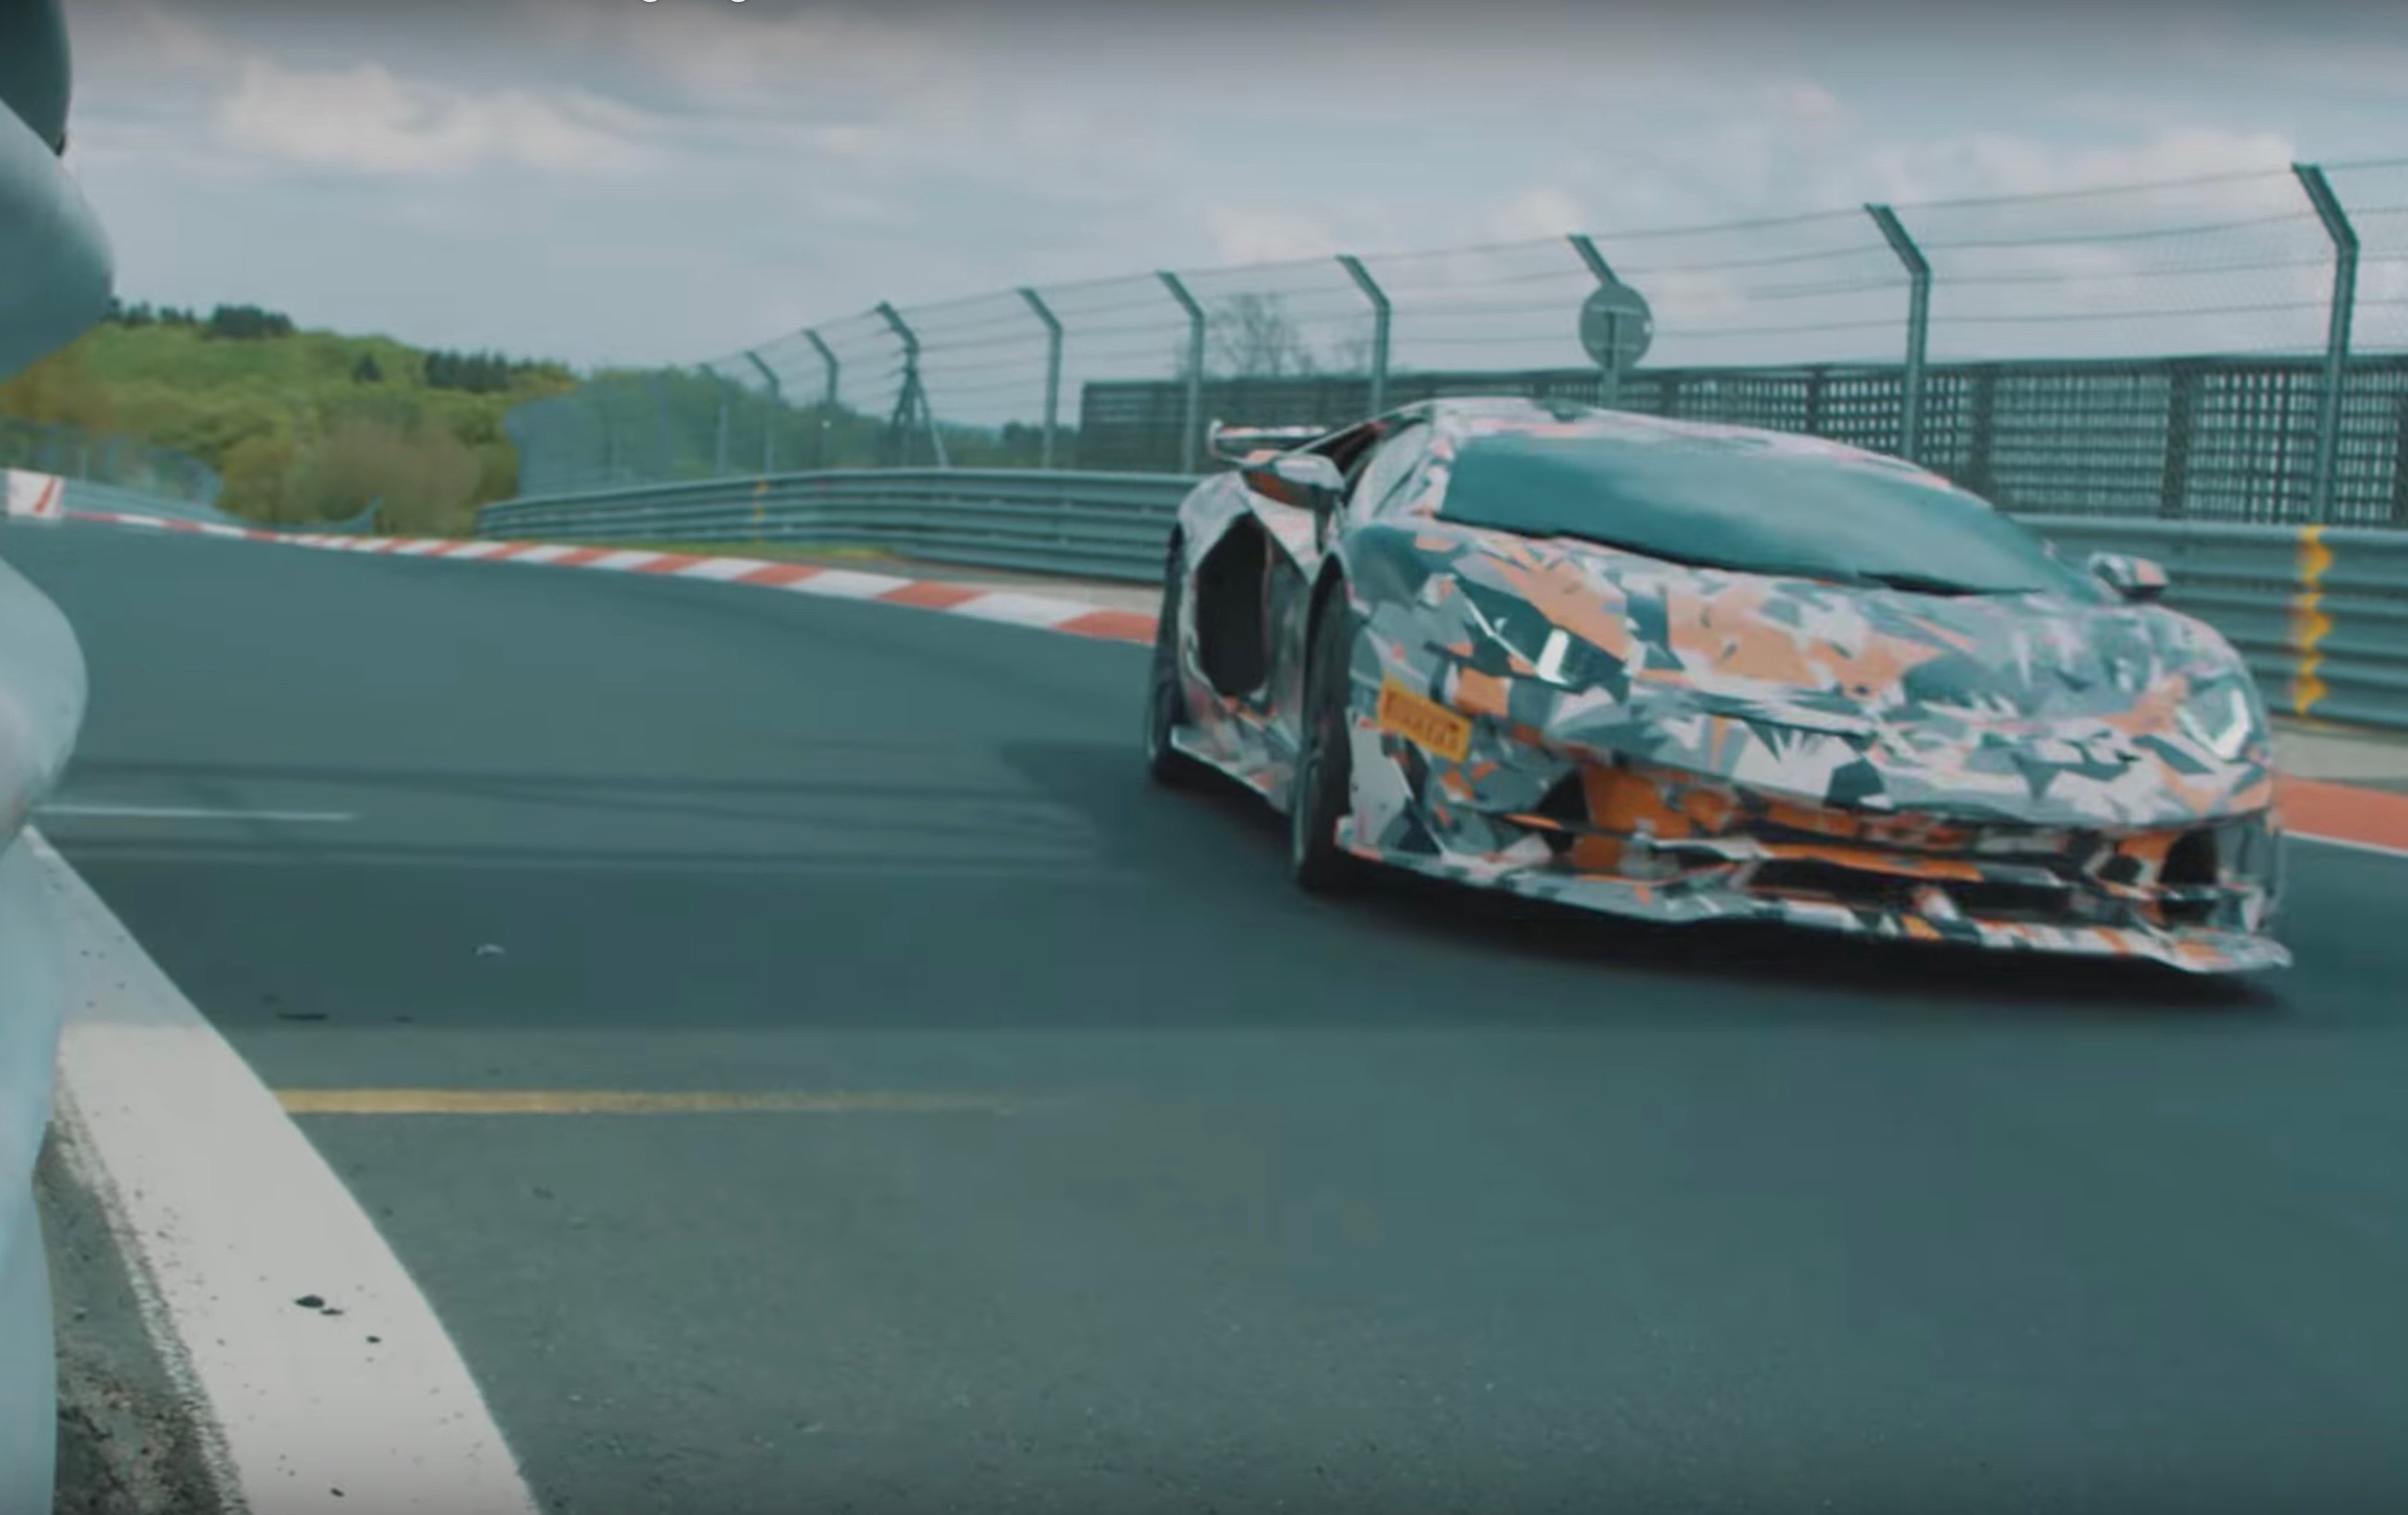 Lamborghini Aventador SVJ confirmed with Nurburgring preview (video)